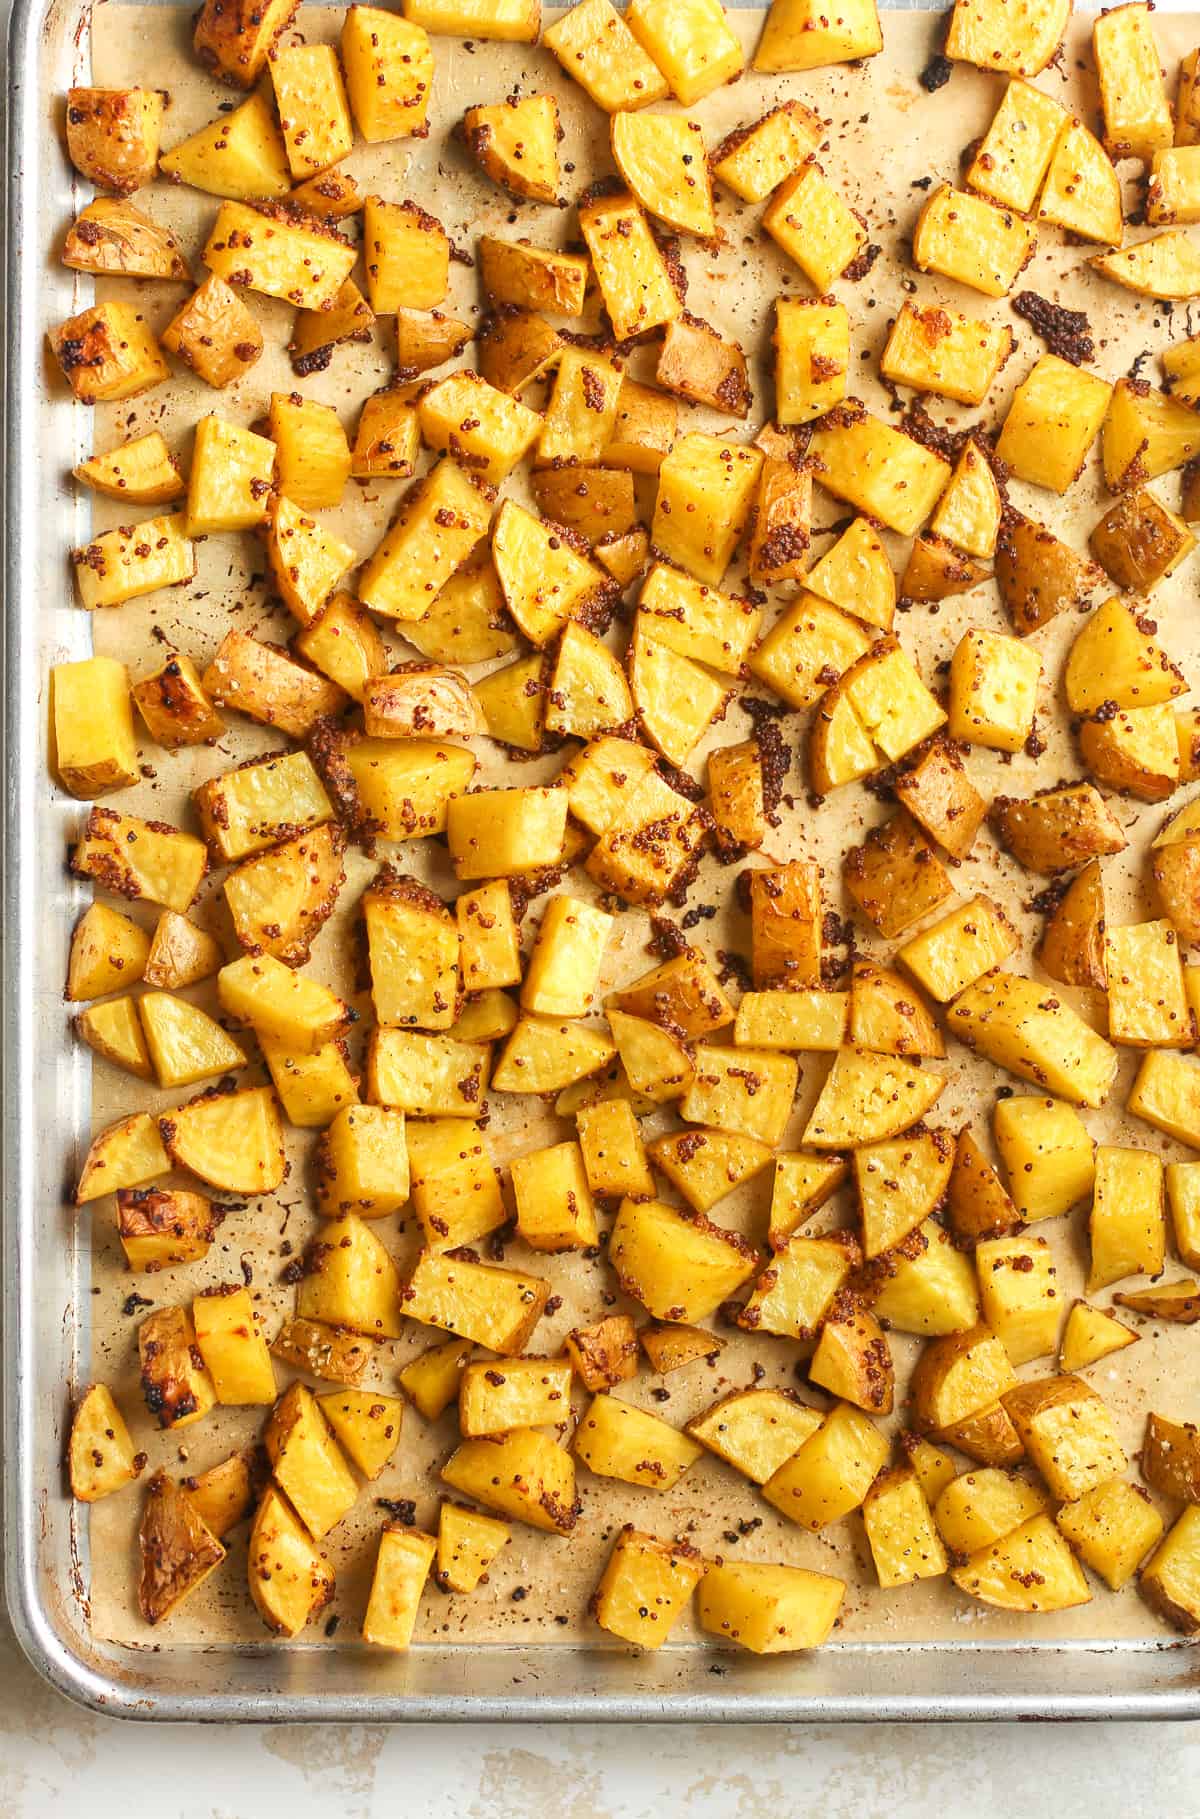 Overhead view of a large sheet pan full of mustard roasted potatoes.